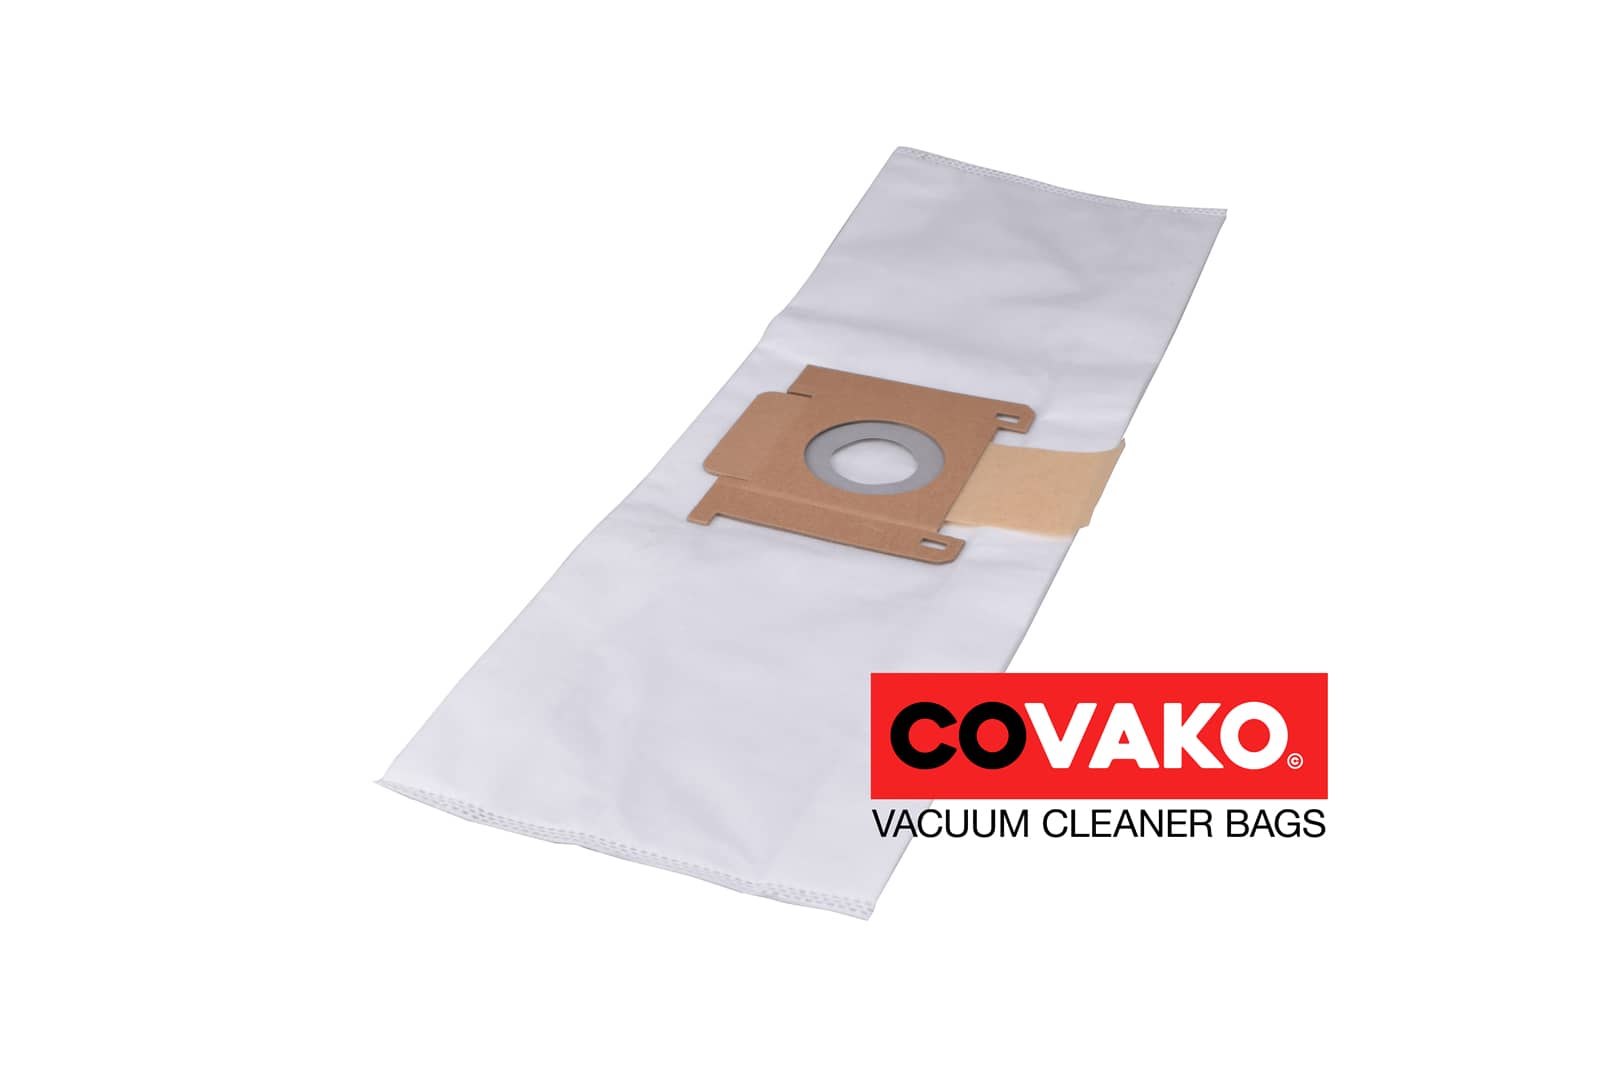 I-vac C6 / Synthesis - I-vac vacuum cleaner bags